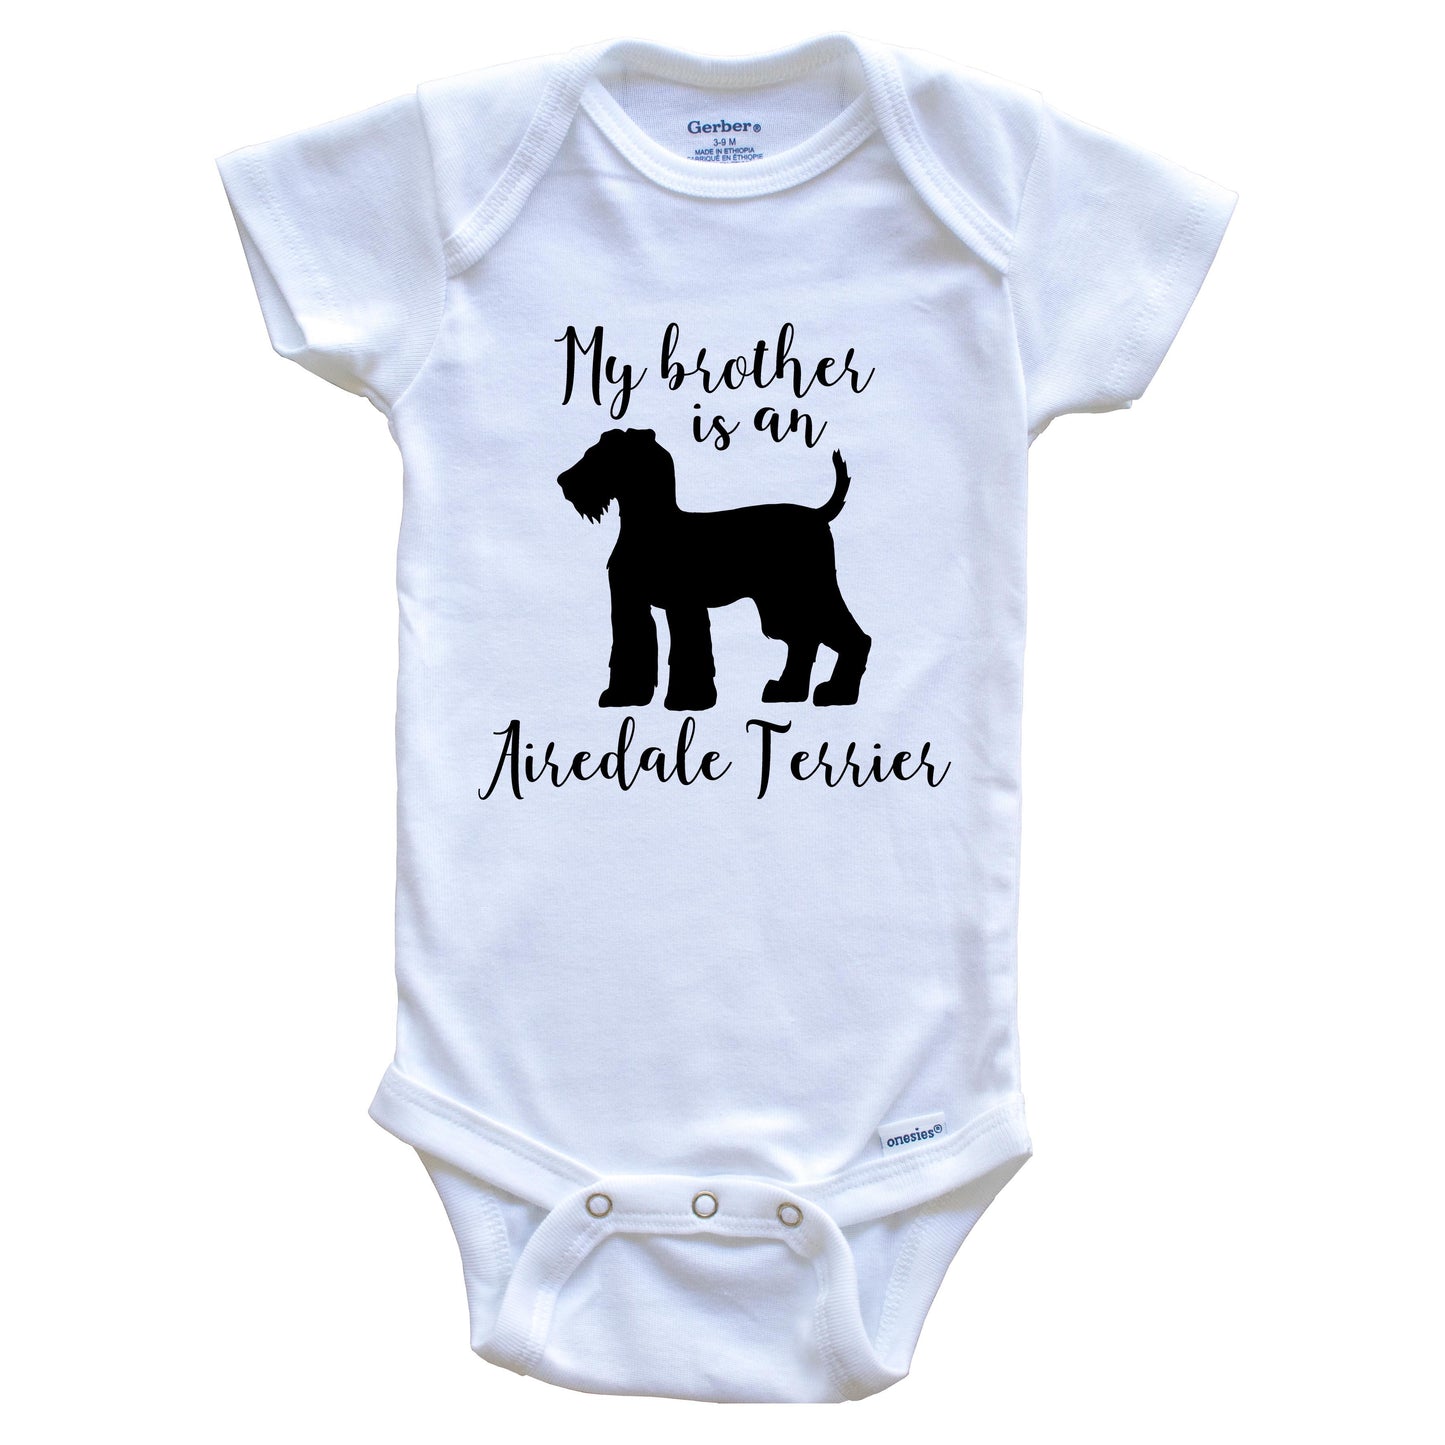 My Brother Is An Airedale Terrier Cute Dog Baby Onesie - Airedale One Piece Baby Bodysuit